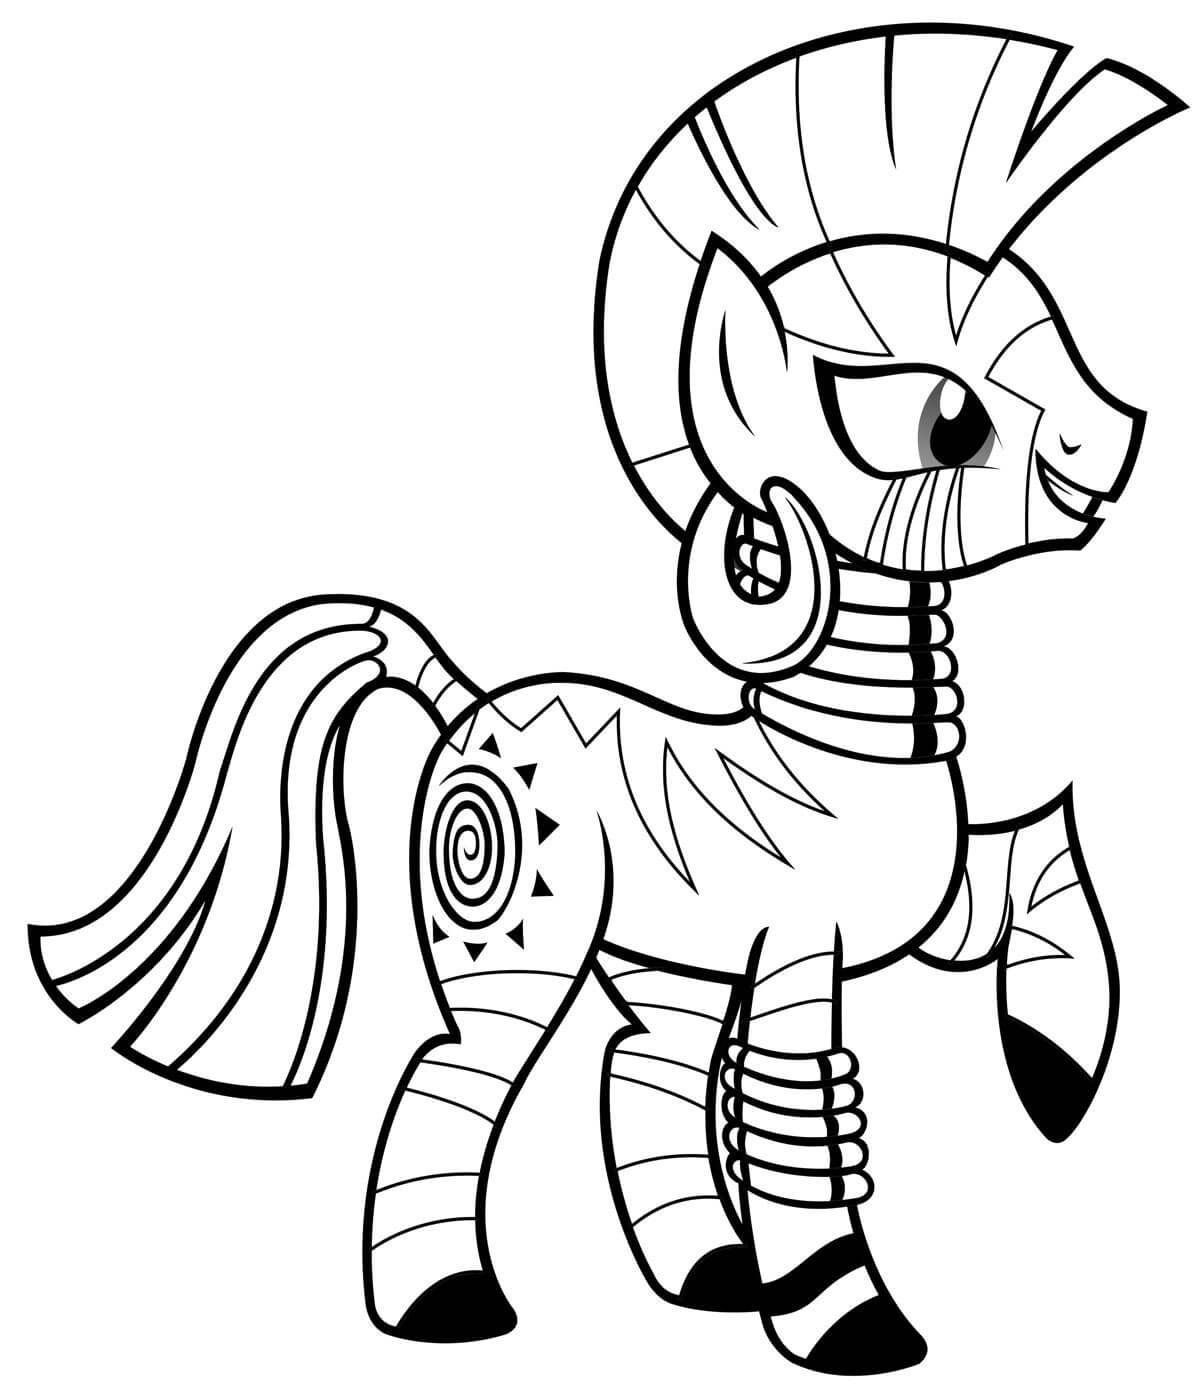 zecora coloring page